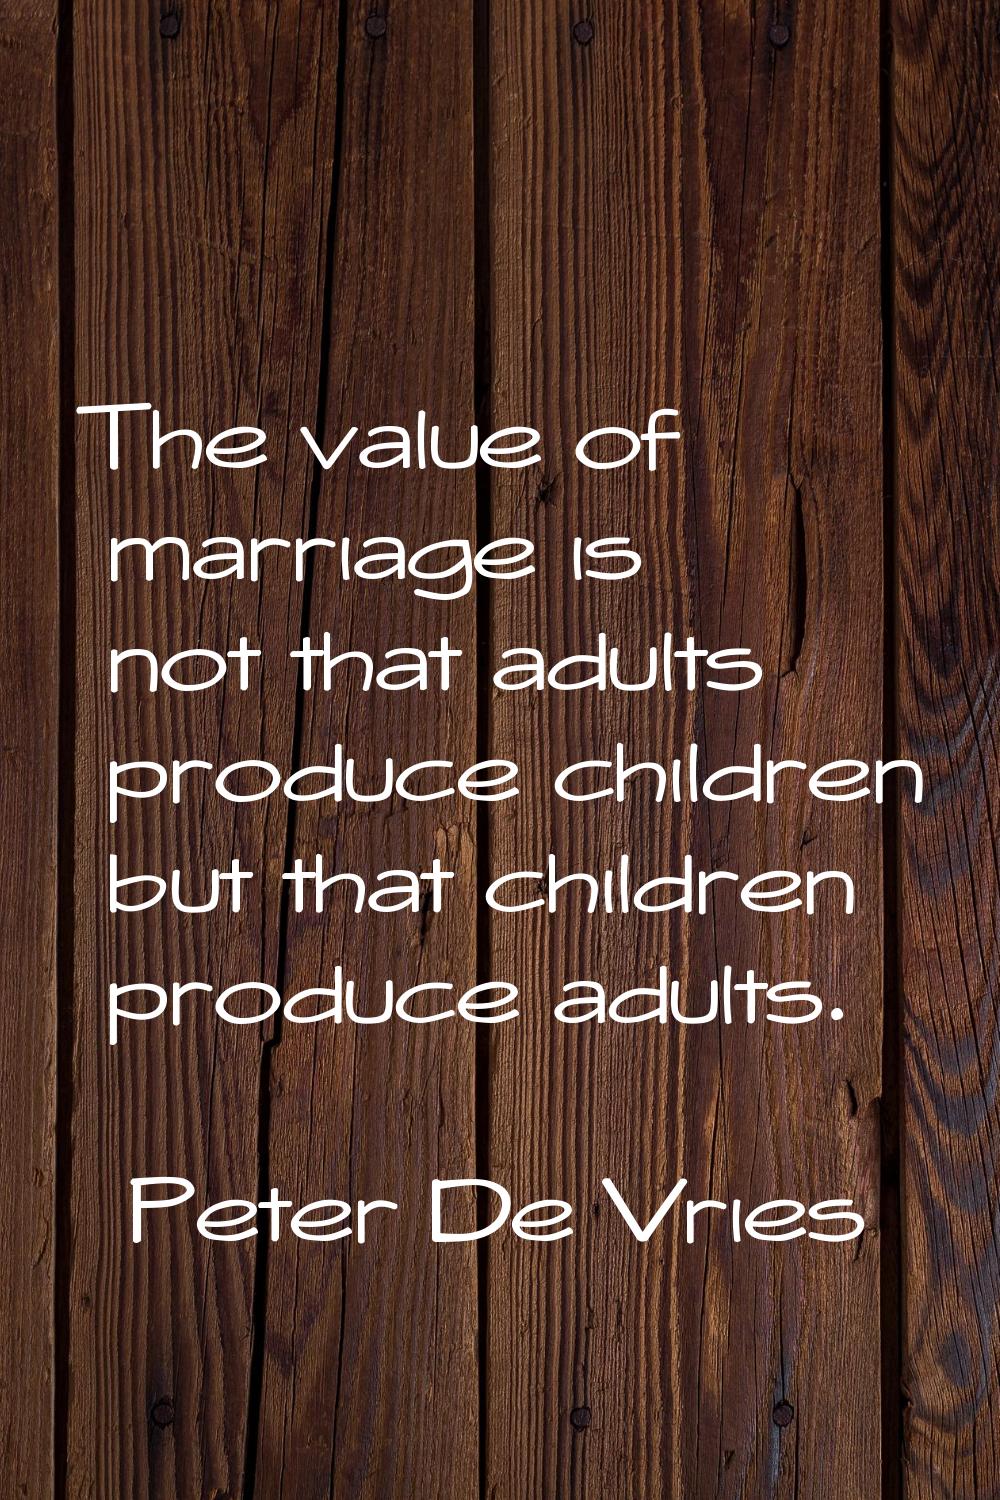 The value of marriage is not that adults produce children but that children produce adults.